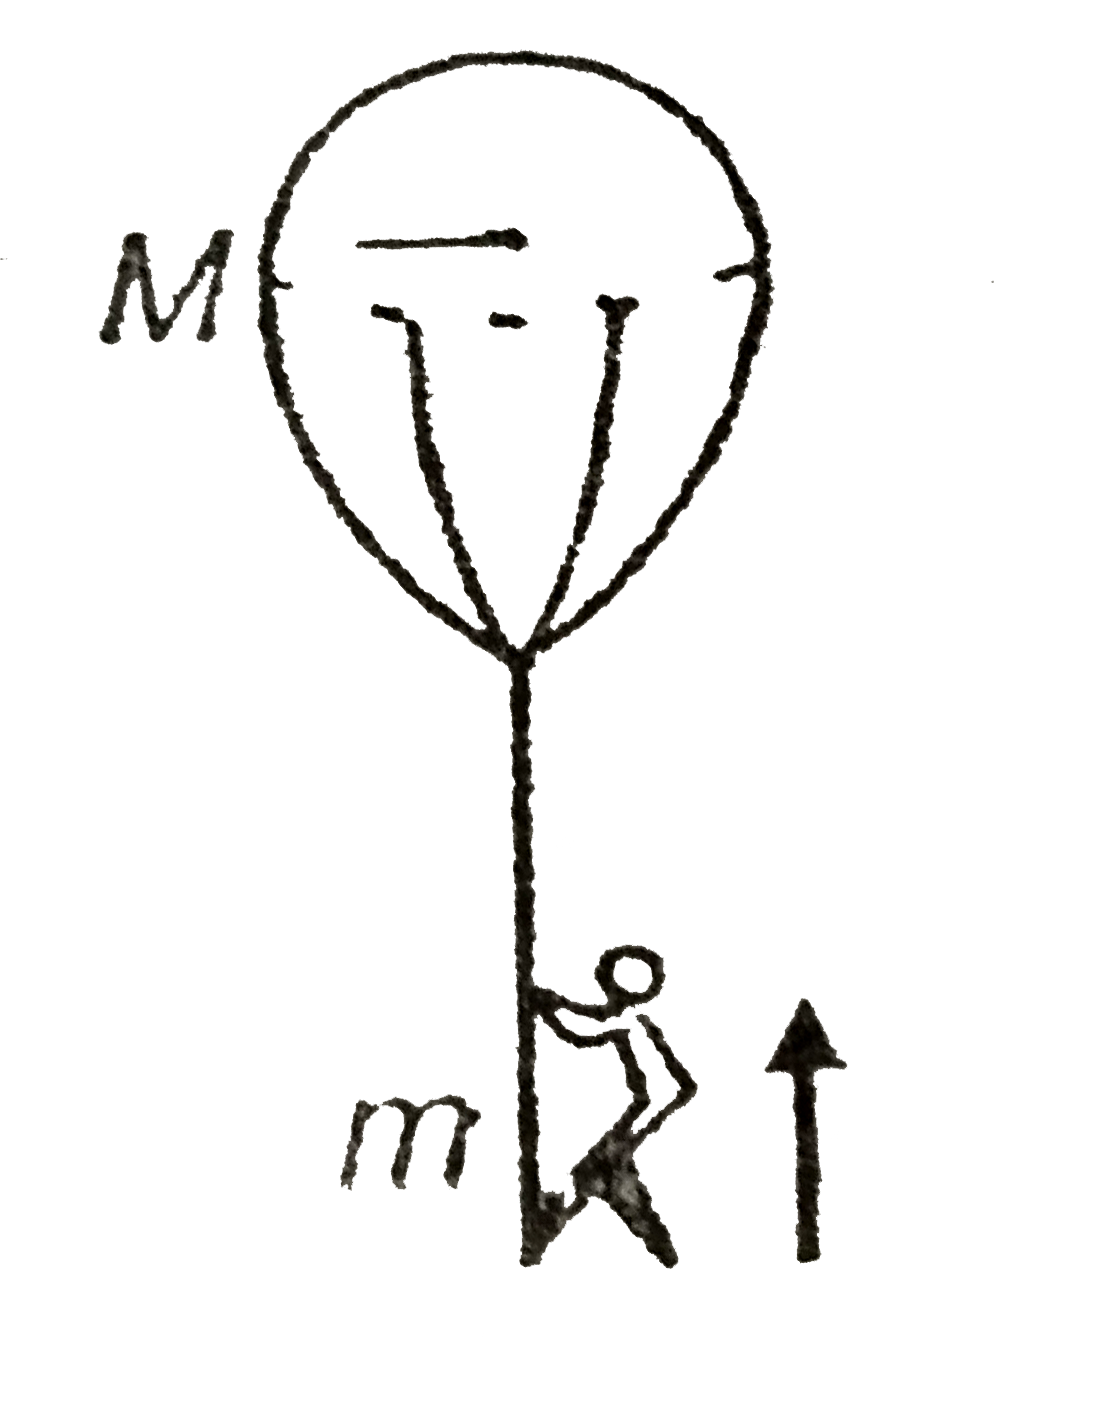 A man of mass m is suspended in air by holding the rope of a ballon of mass M. As the man climbs up the rope, the ballon